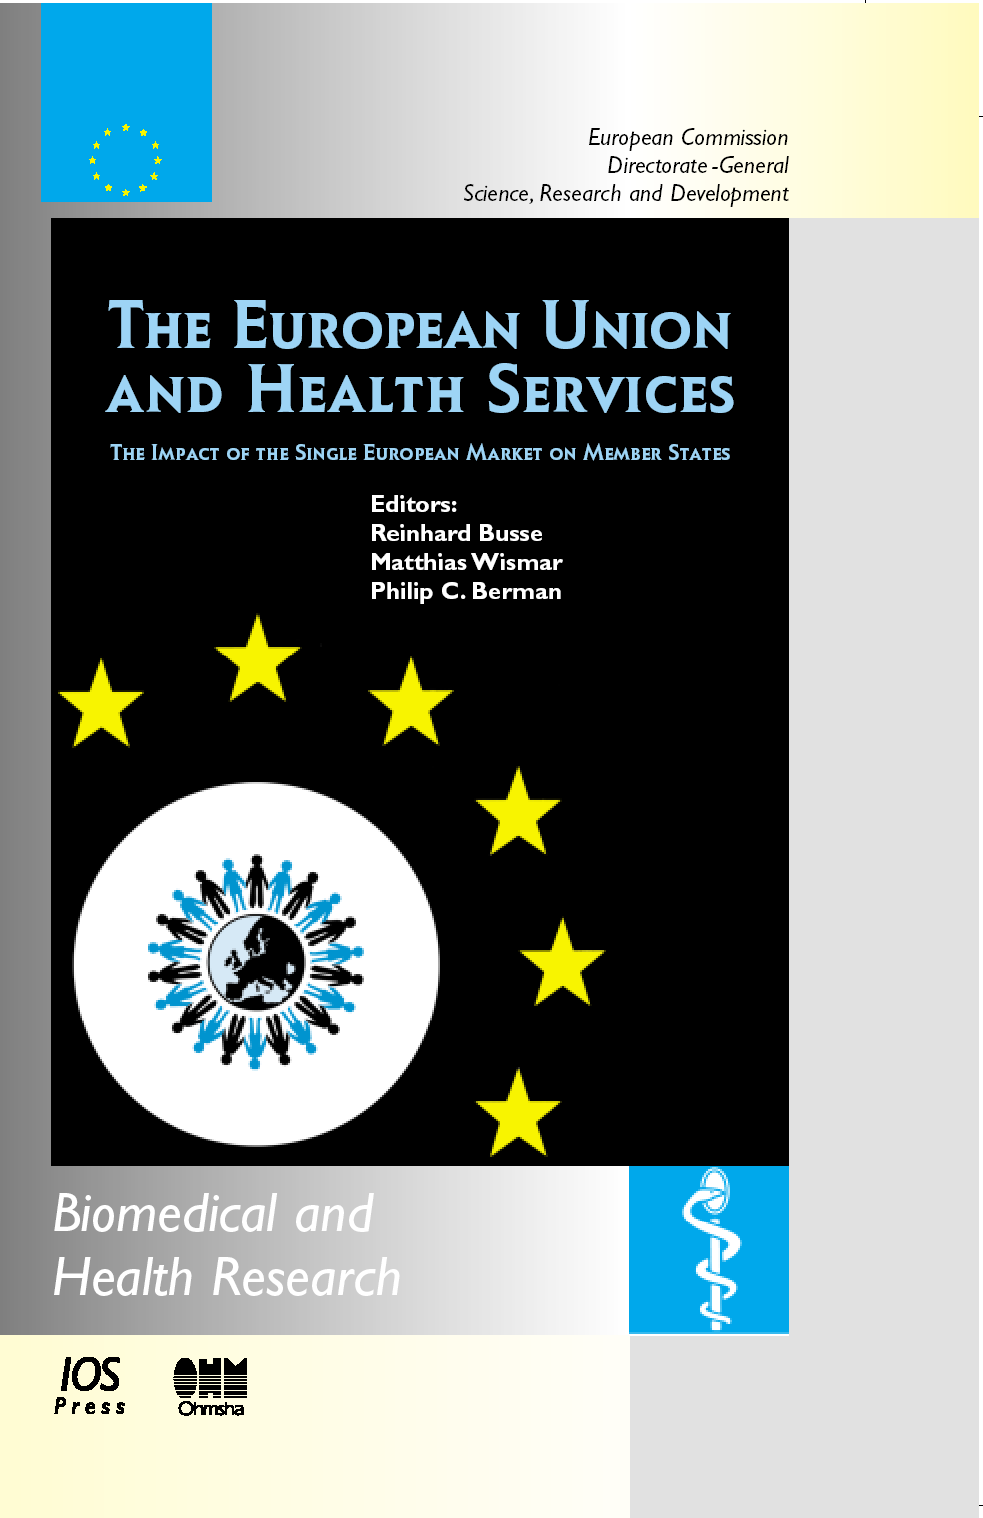 At European level, health services have to adapt to market rules, while at national level, health services are seen as part of a social model.